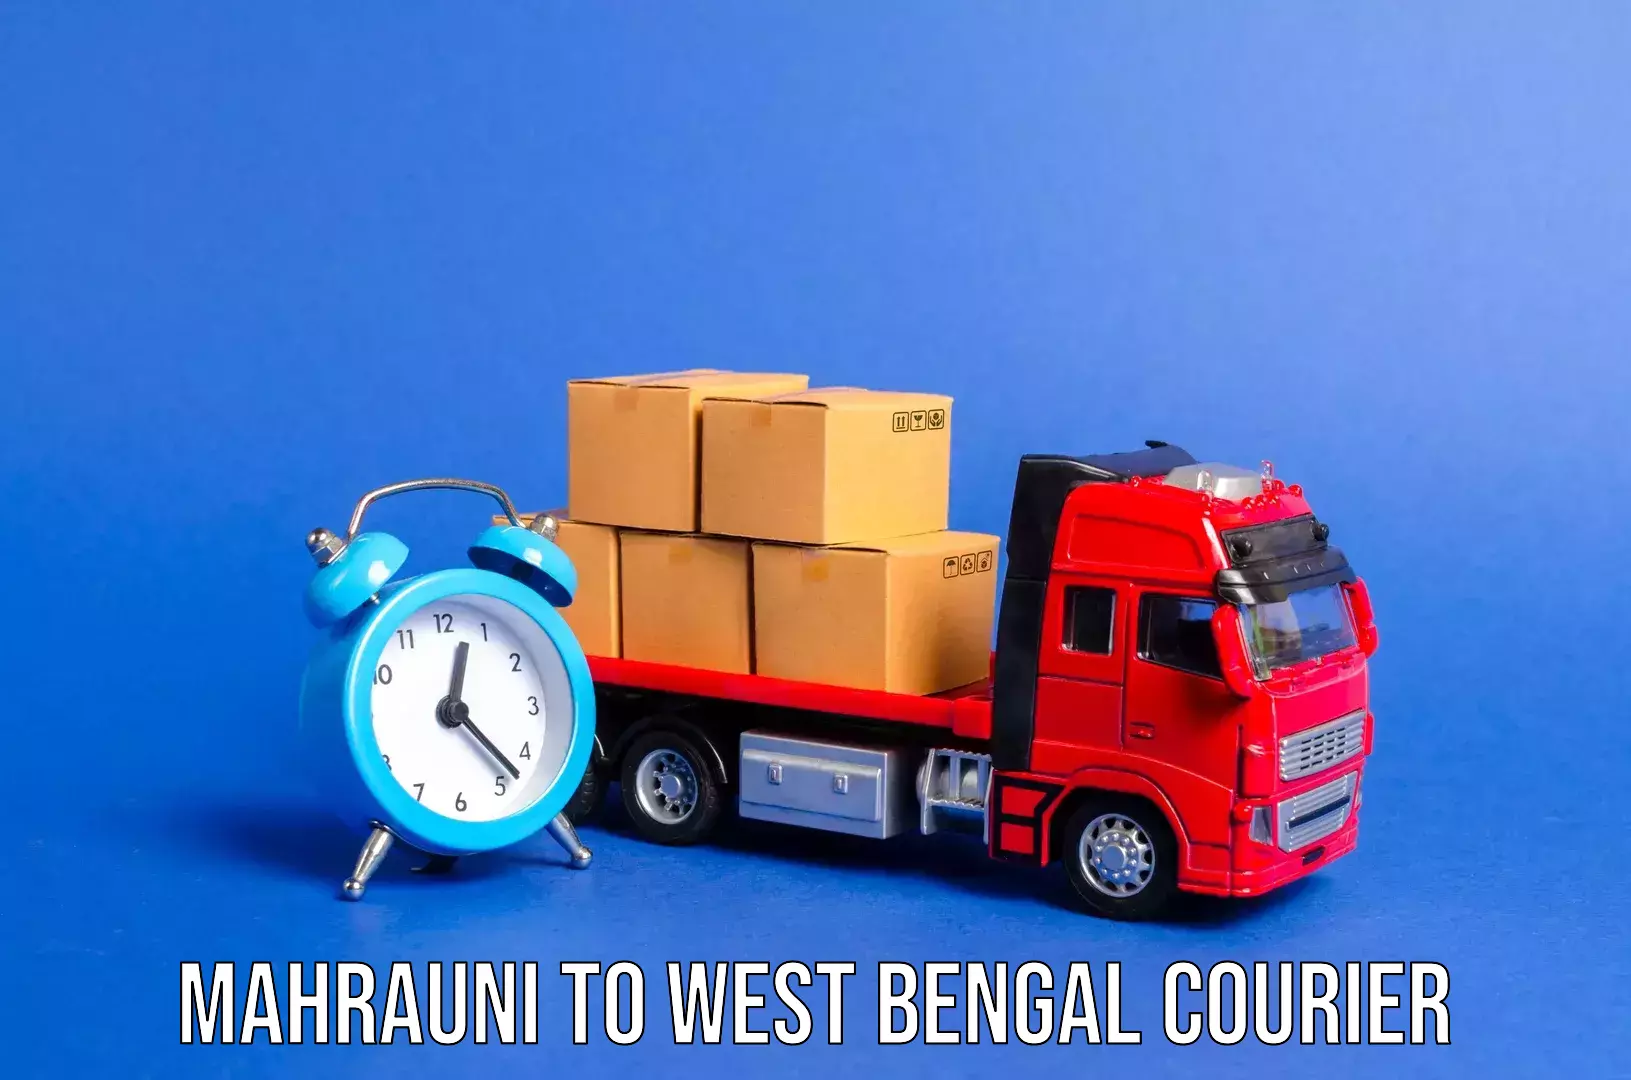 Luggage delivery network Mahrauni to West Bengal